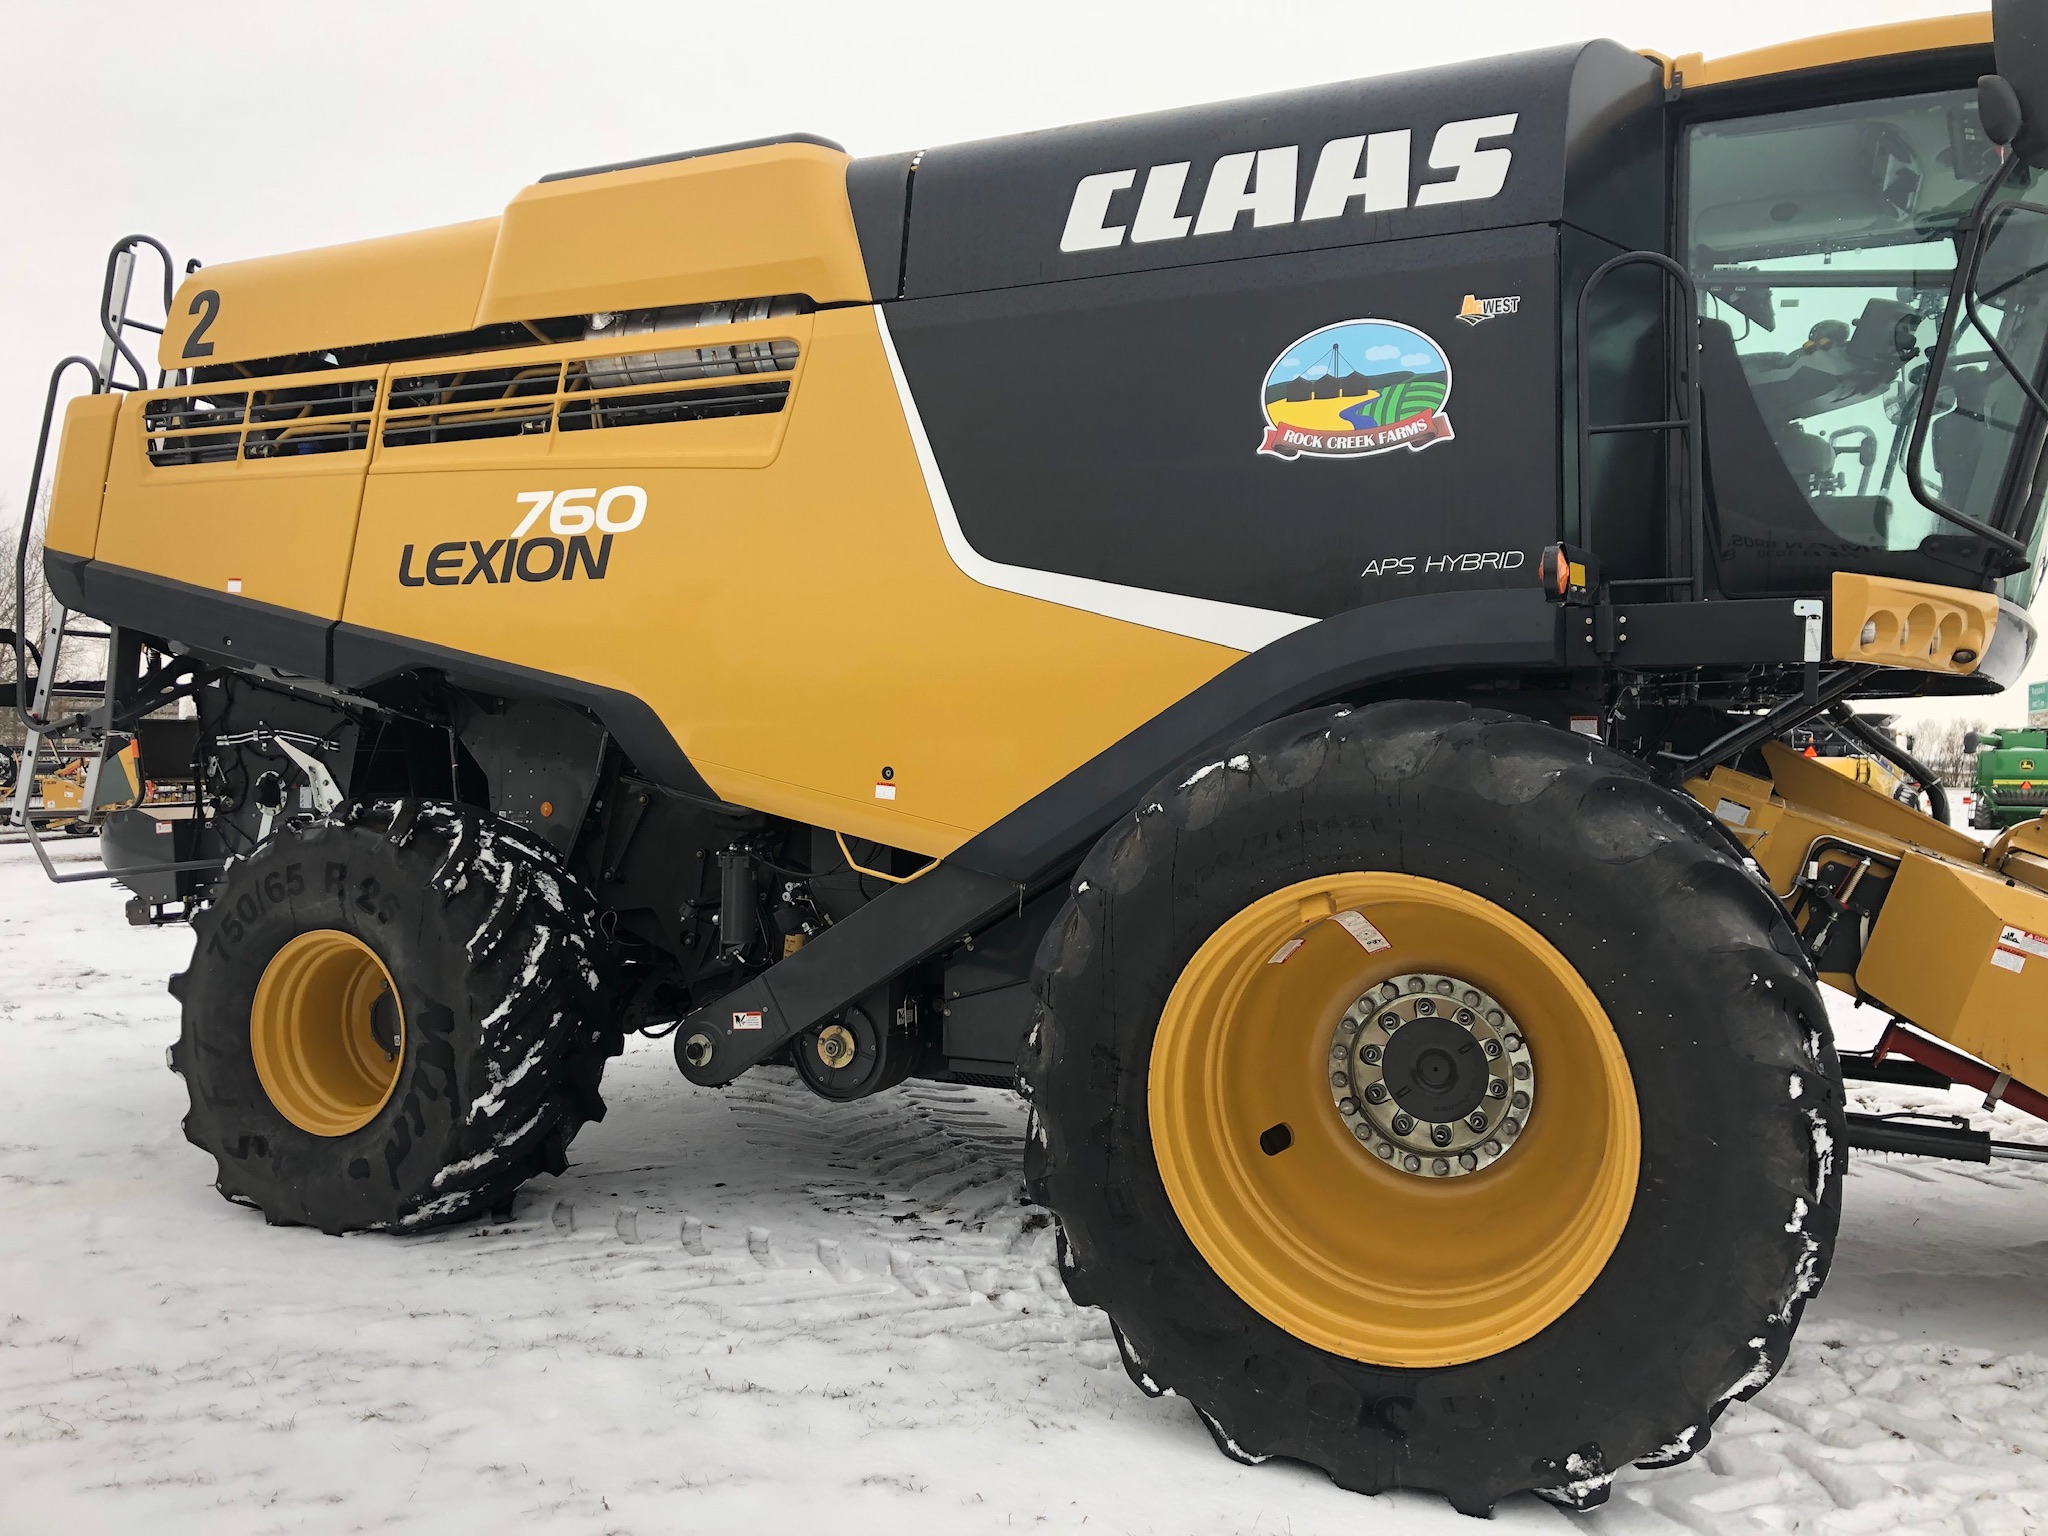 2018 Claas 760 Combine For Sale In Russell Mb Ironsearch 9063